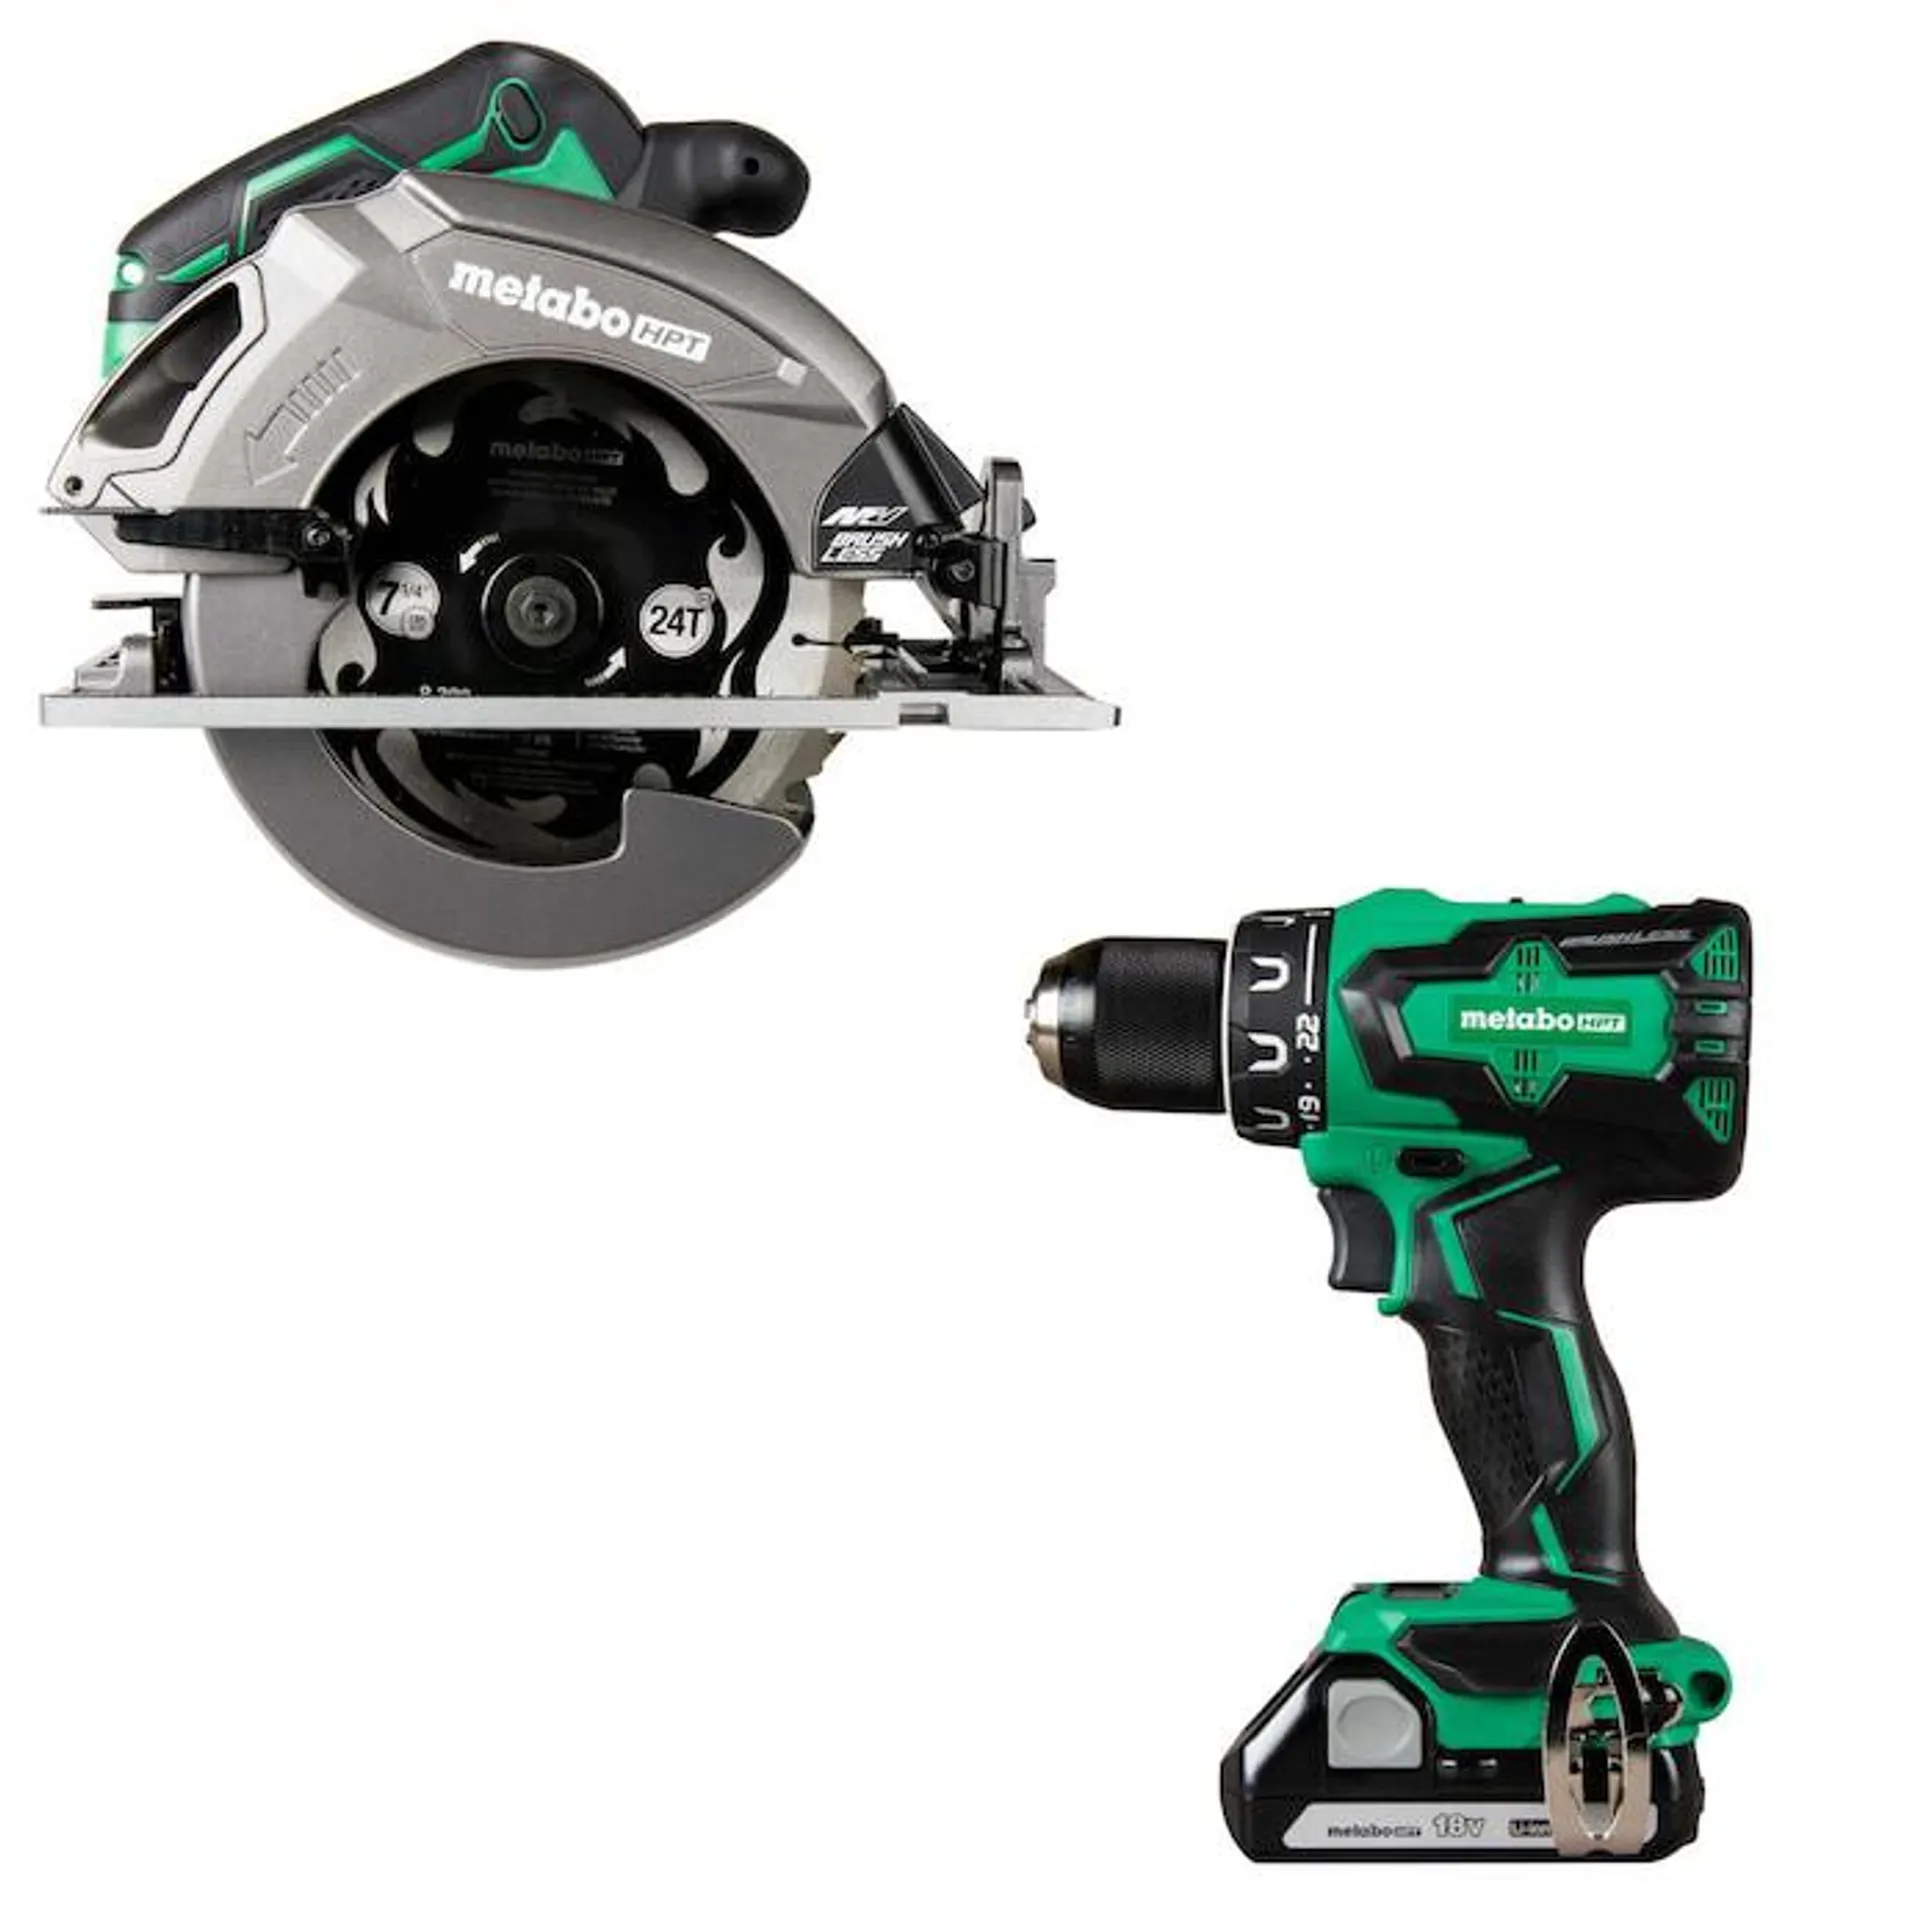 MultiVolt 36-Volt 7-1/4-in Brushless Circular Saw with MultiVolt 18-volt 1/2-in Brushless Cordless Drill (2-batteries included and charger included)